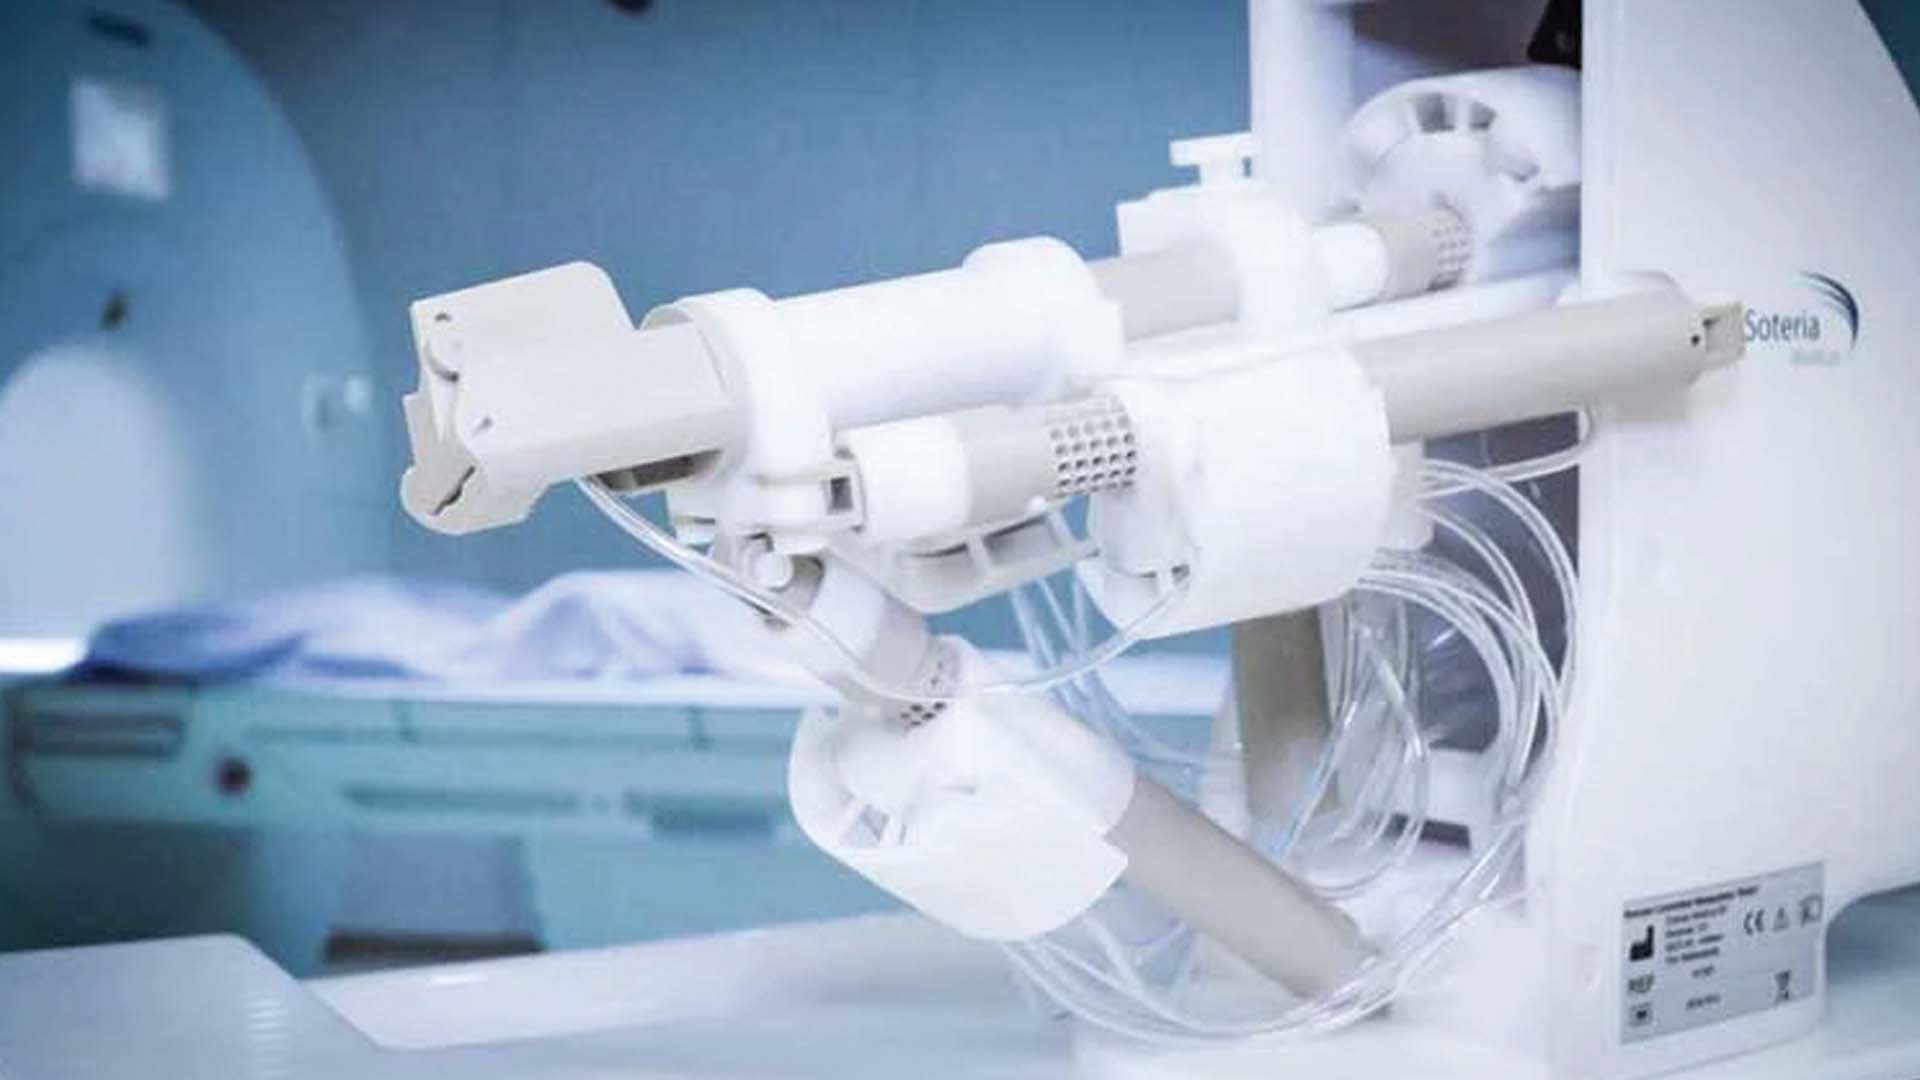 Robotic Probes Makes Prostate Biopsies More Accurate Using Pneumatics